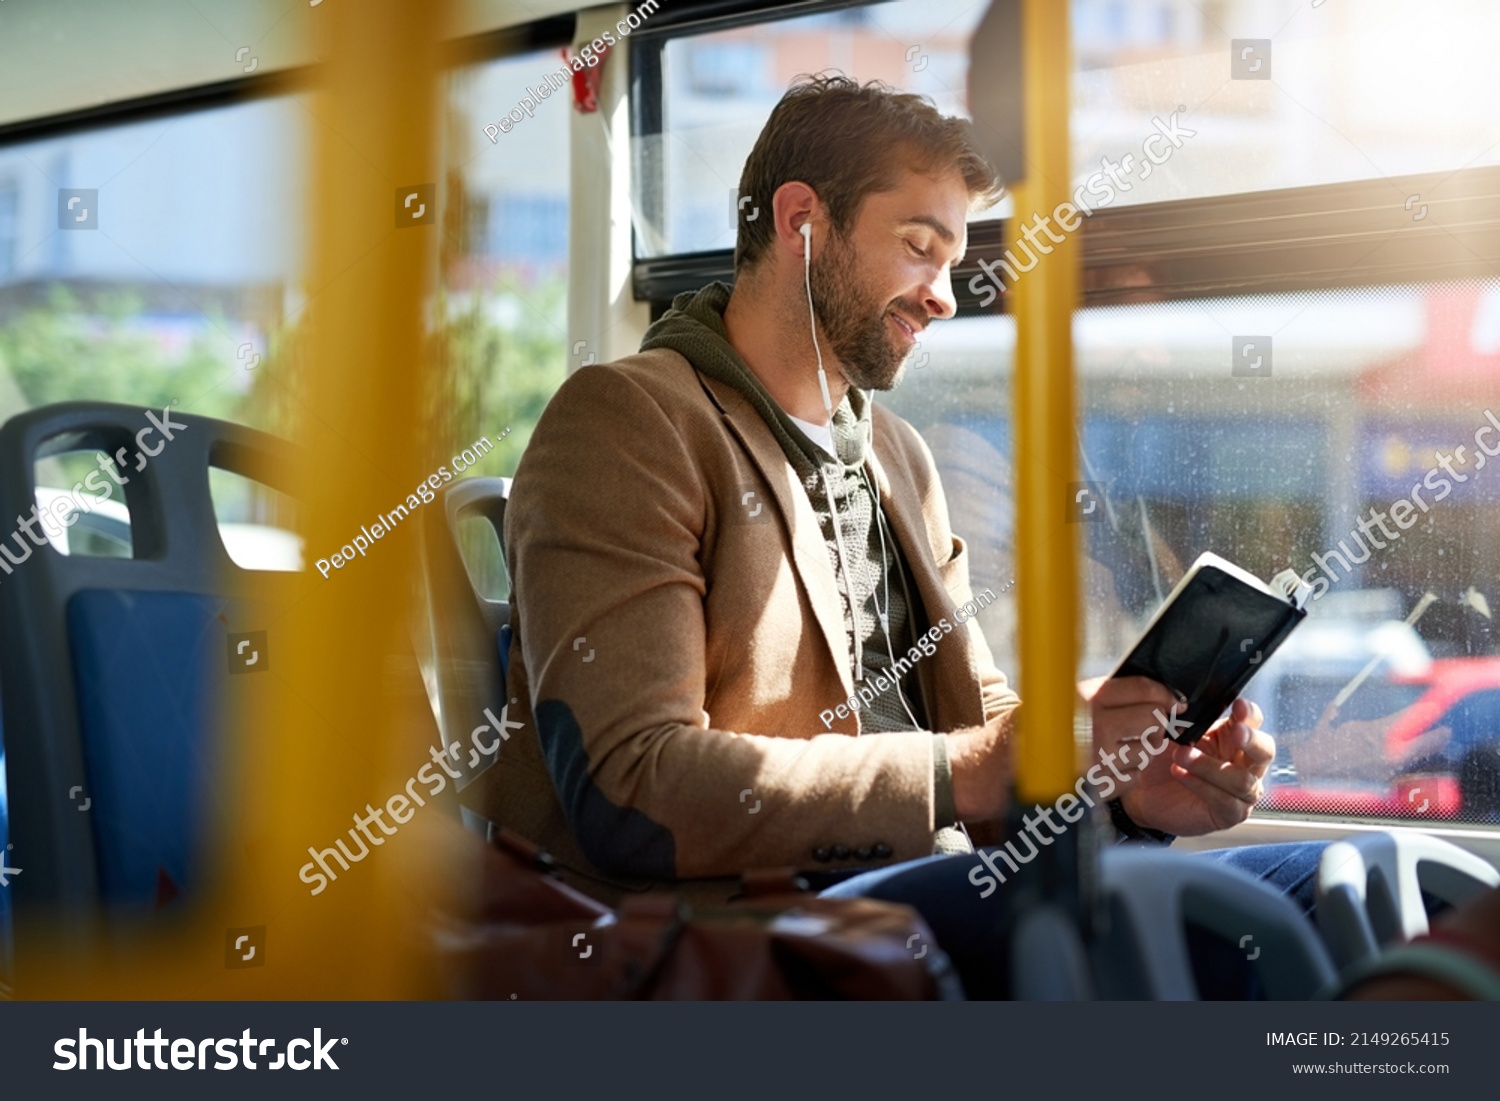 Checking out the best tourist spots. Cropped shot of a handsome young man reading a book during his morning bus commute. #2149265415